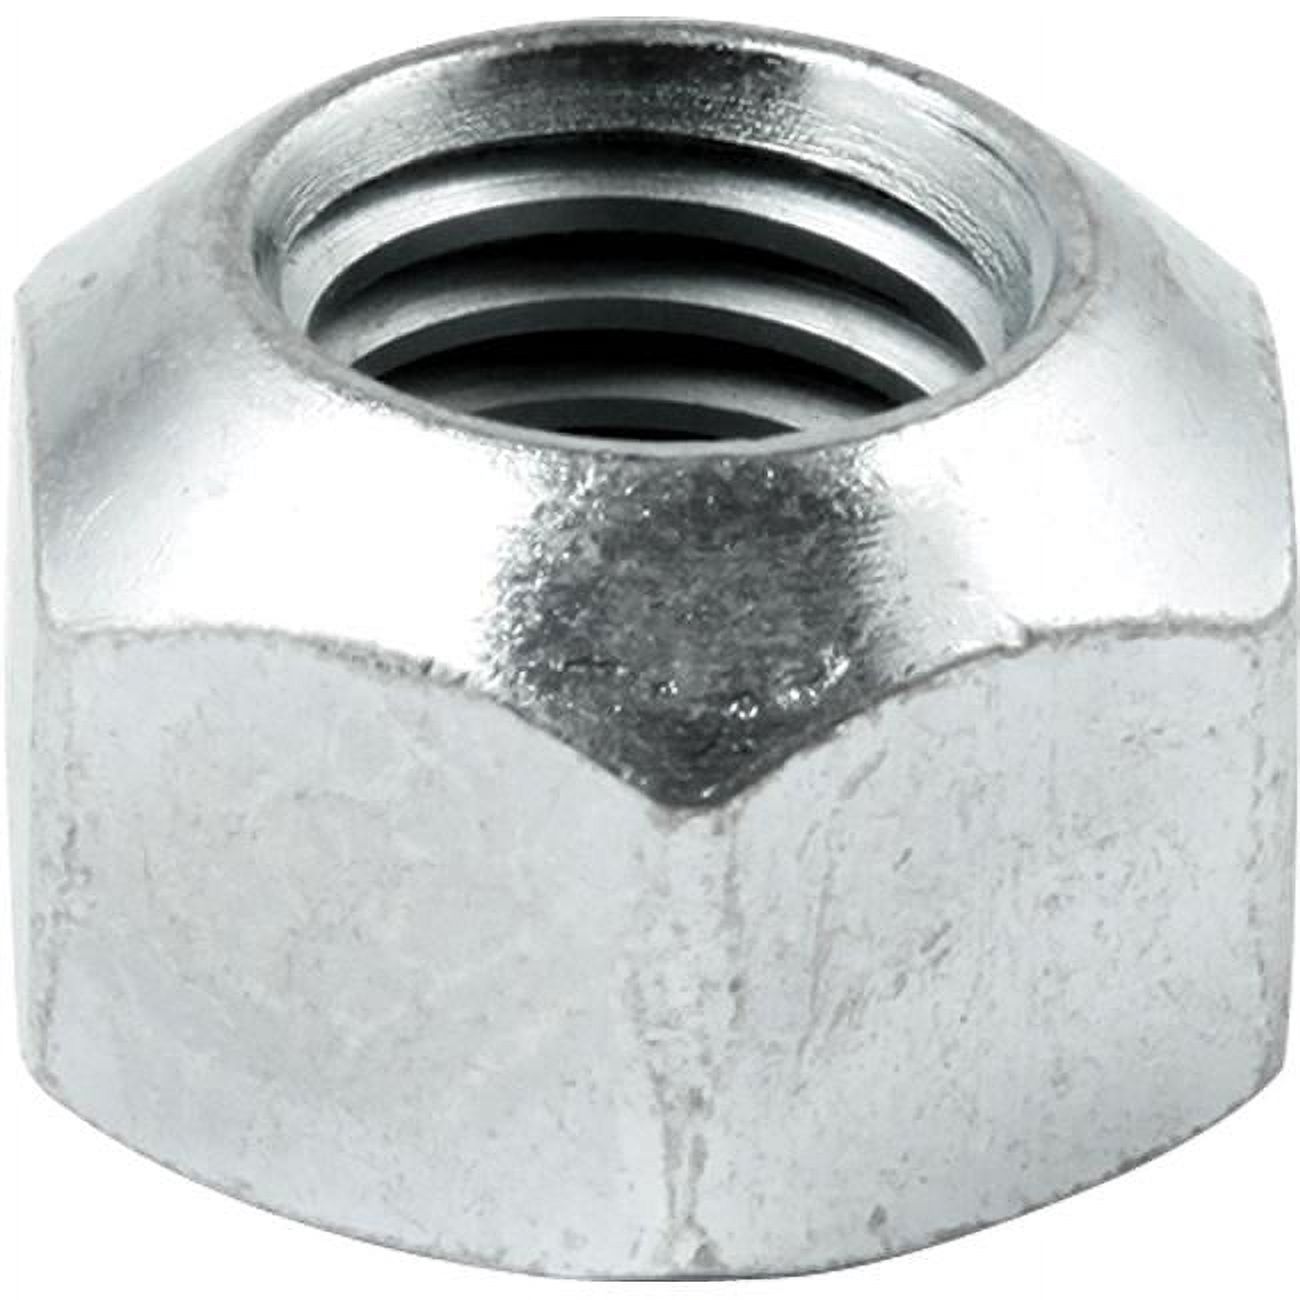 Allstar Performance ALL44106-100 0.62 in.-11 Steel Lug Nuts, Pack of 100 - image 1 of 4